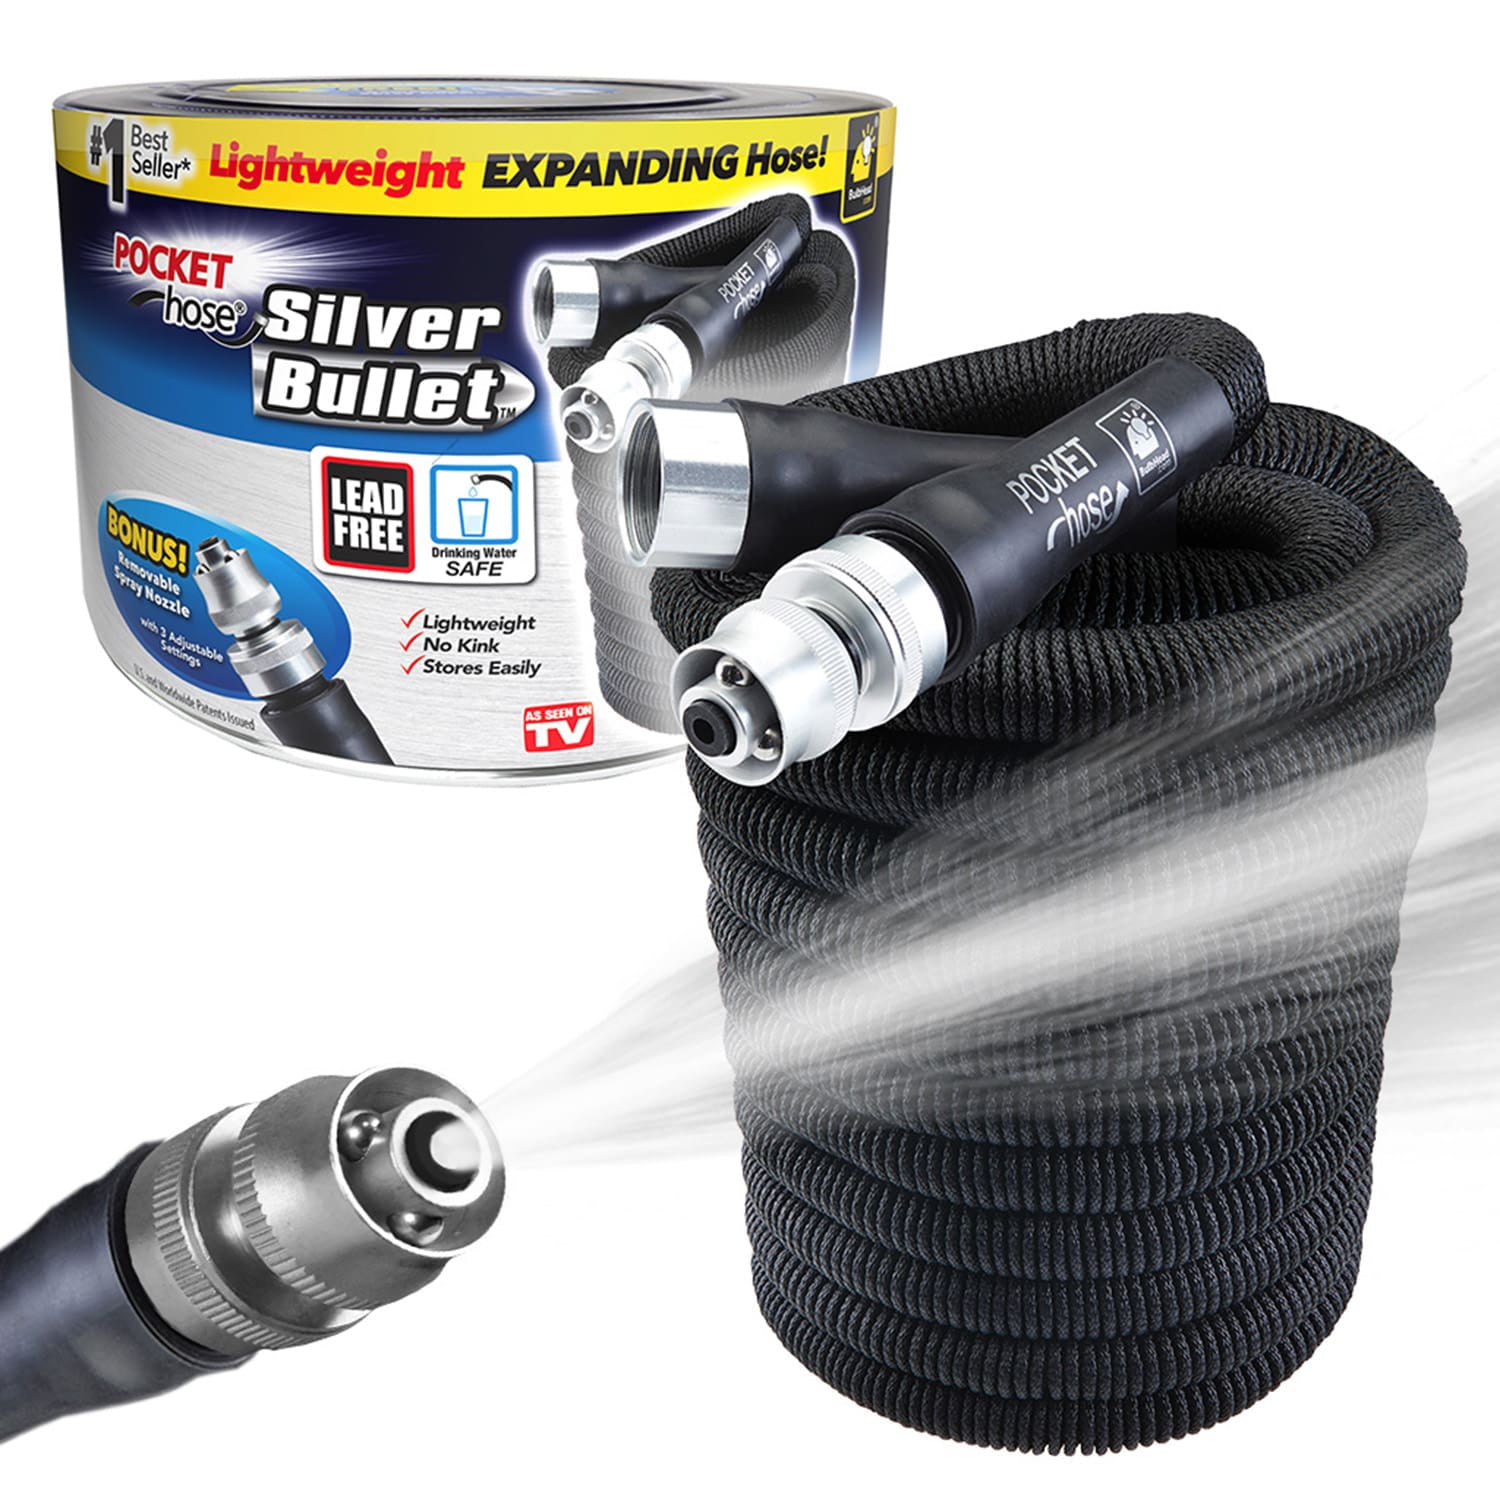 Pocket Hose Original Silver Bullet Water Hose by BulbHead